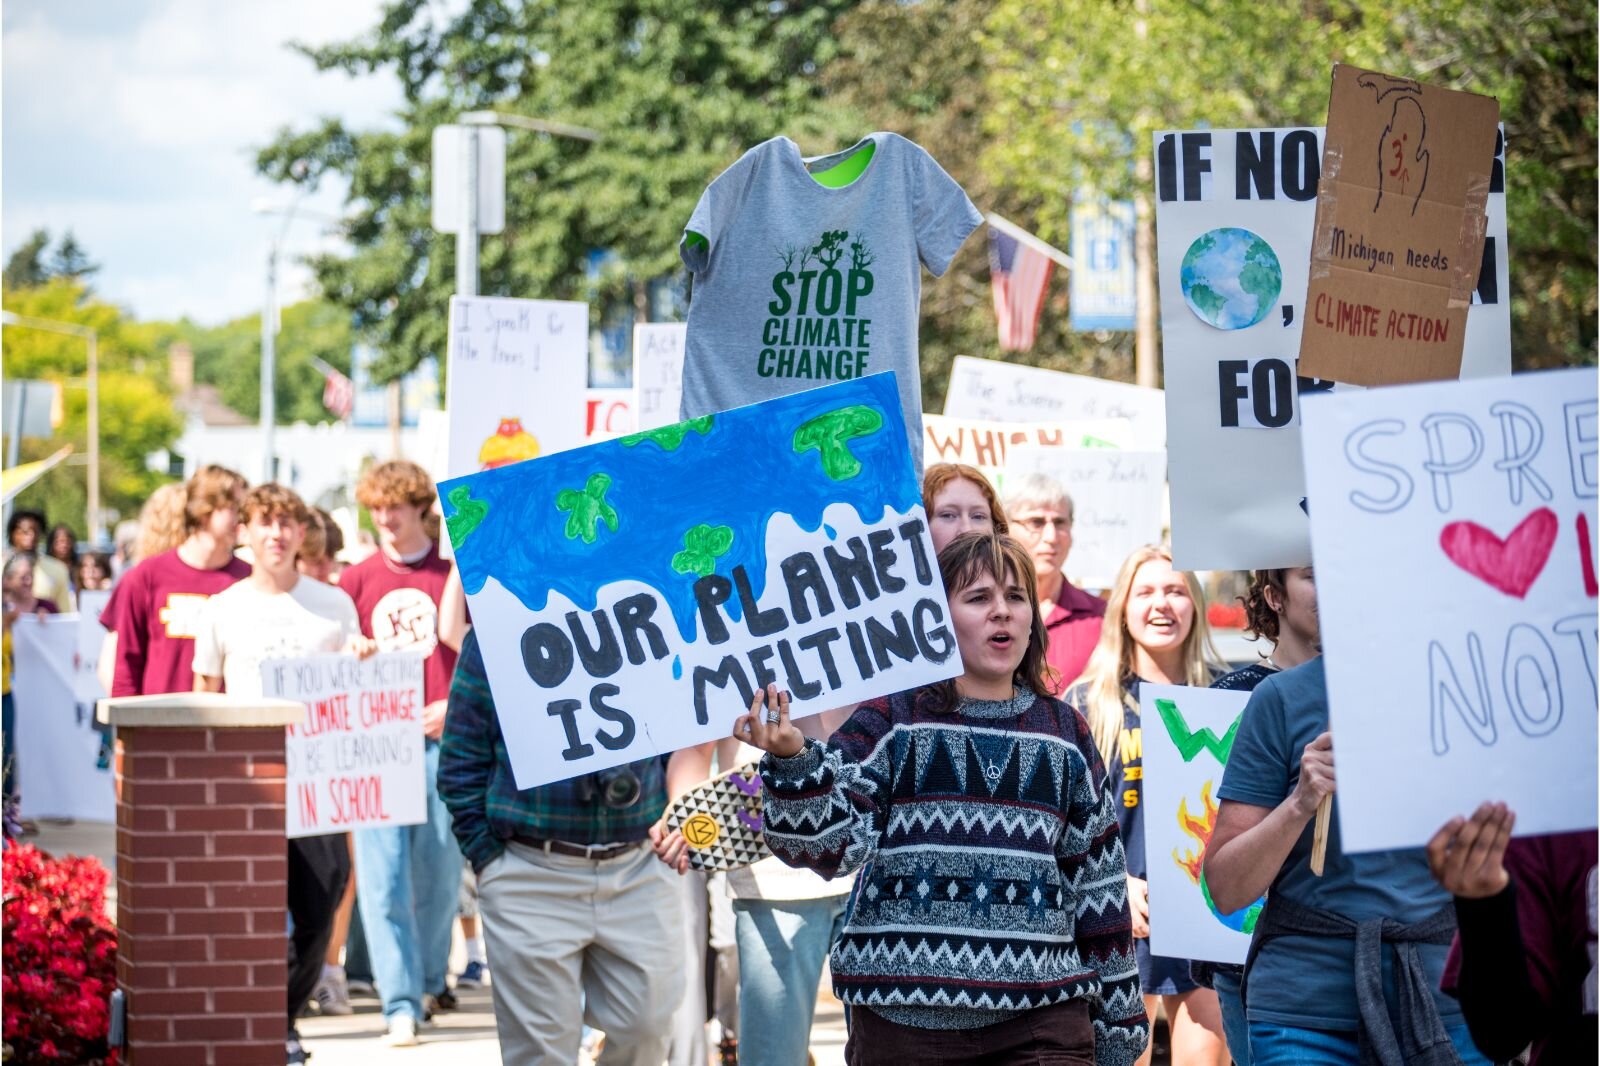 Students marched through downtown Kalamazoo last Friday as part of the Youth Climate Strike.